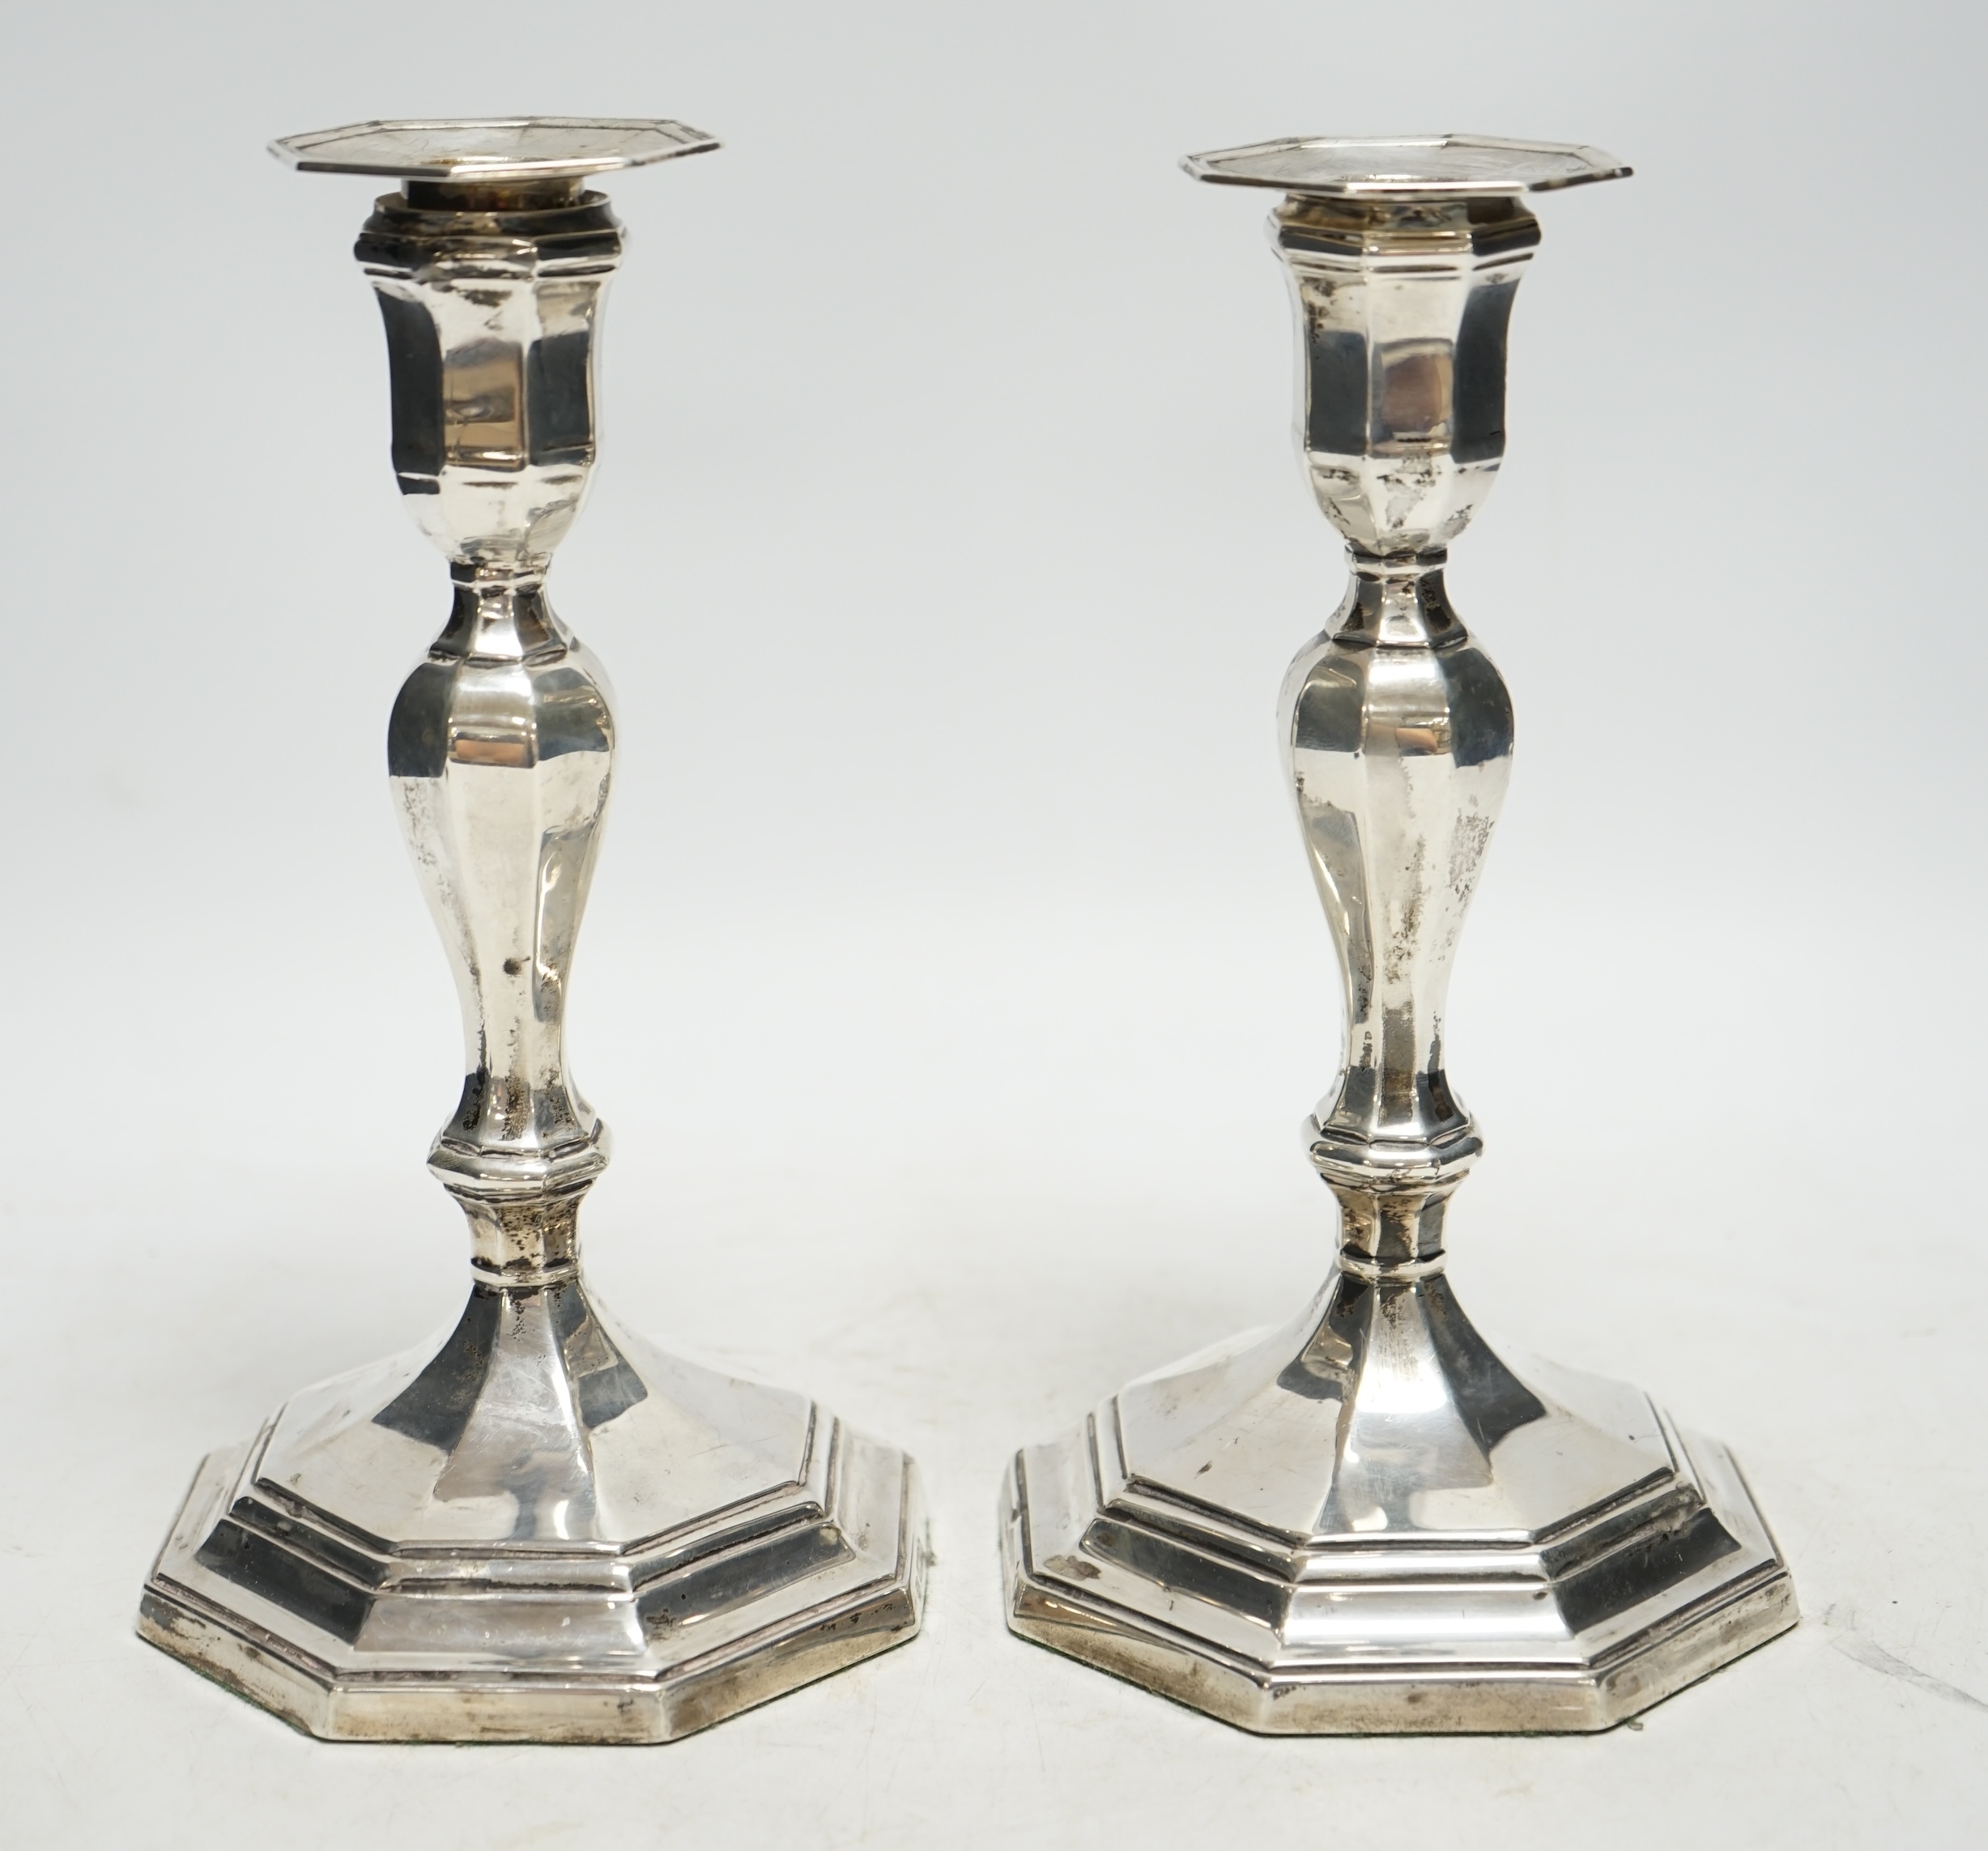 A pair of Edwardian silver octagonal candlesticks, Hawksworth, Eyre & Co Ltd, Sheffield, 1905, 21.7cm, weighted. Condition - average to fair